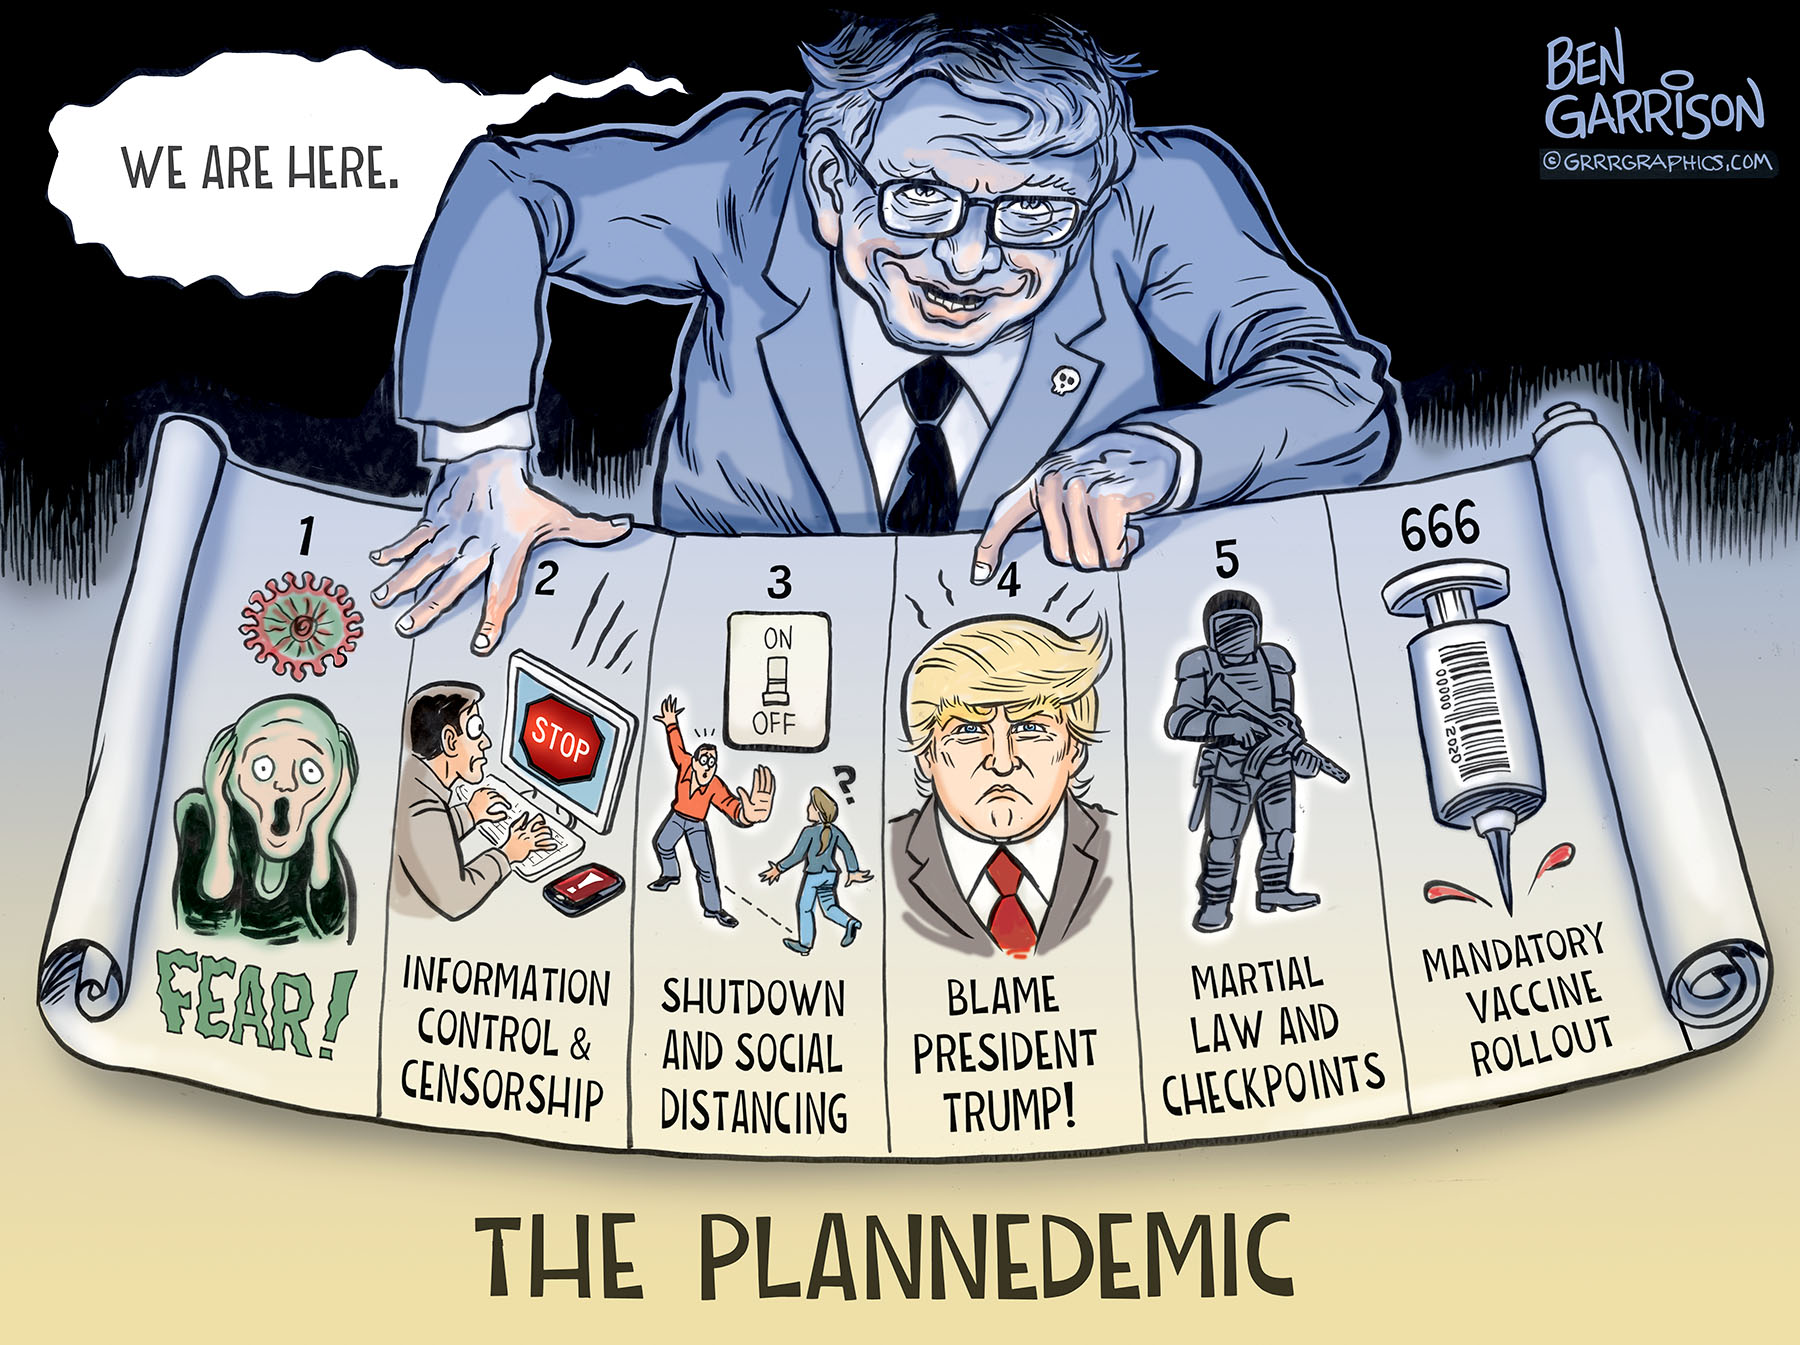 Anthony Fauci plays ball with this kind of deadly planner. Copyright 2020 Ben Garrison.